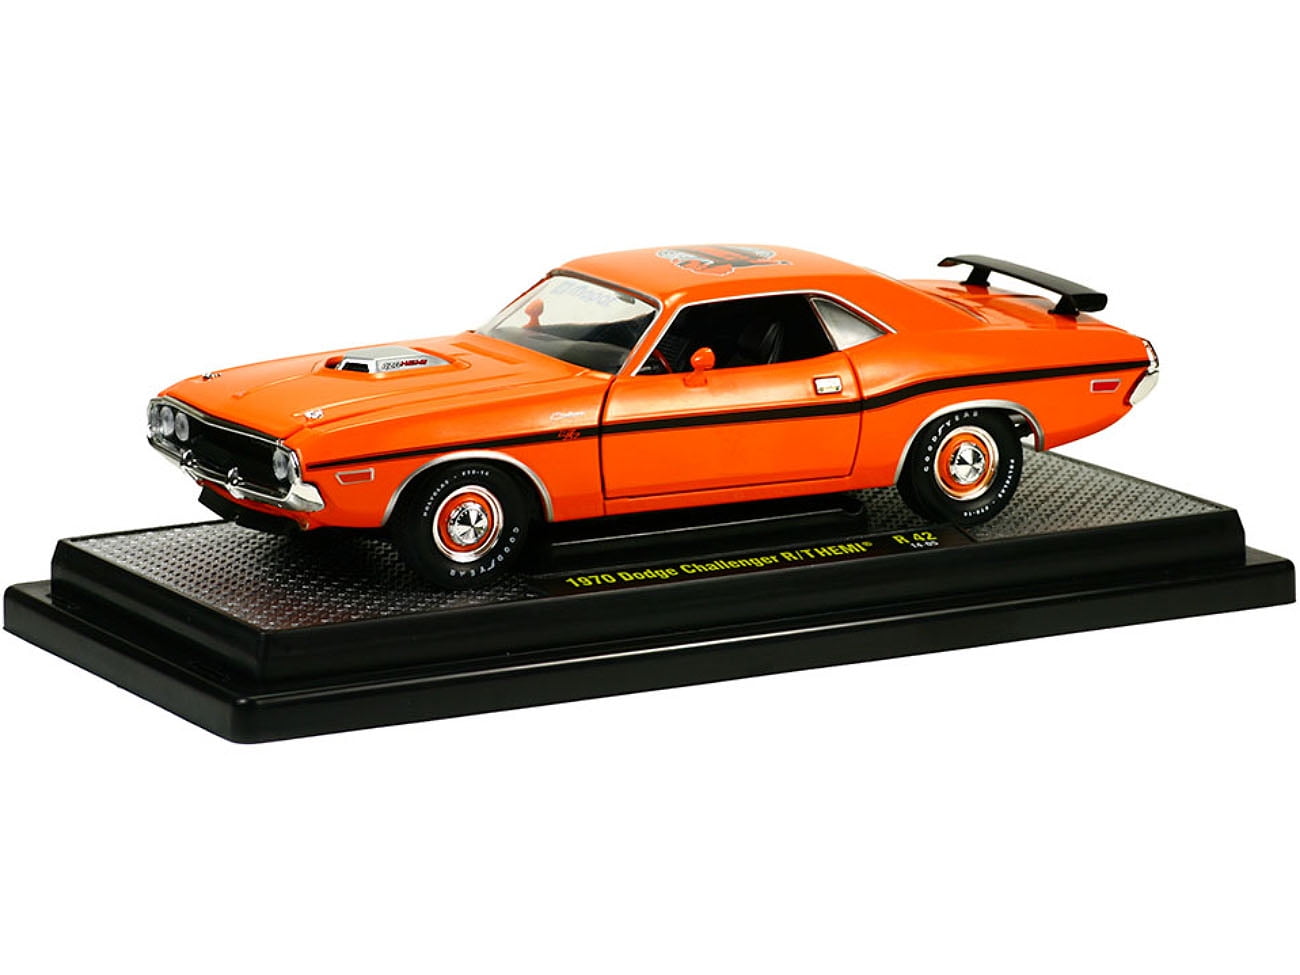 1970 FORD MUSTANG BOSS 429 "THUMPR CAMS" WHITE 1/24 DIECAST CAR BY M2 40300-62 A 